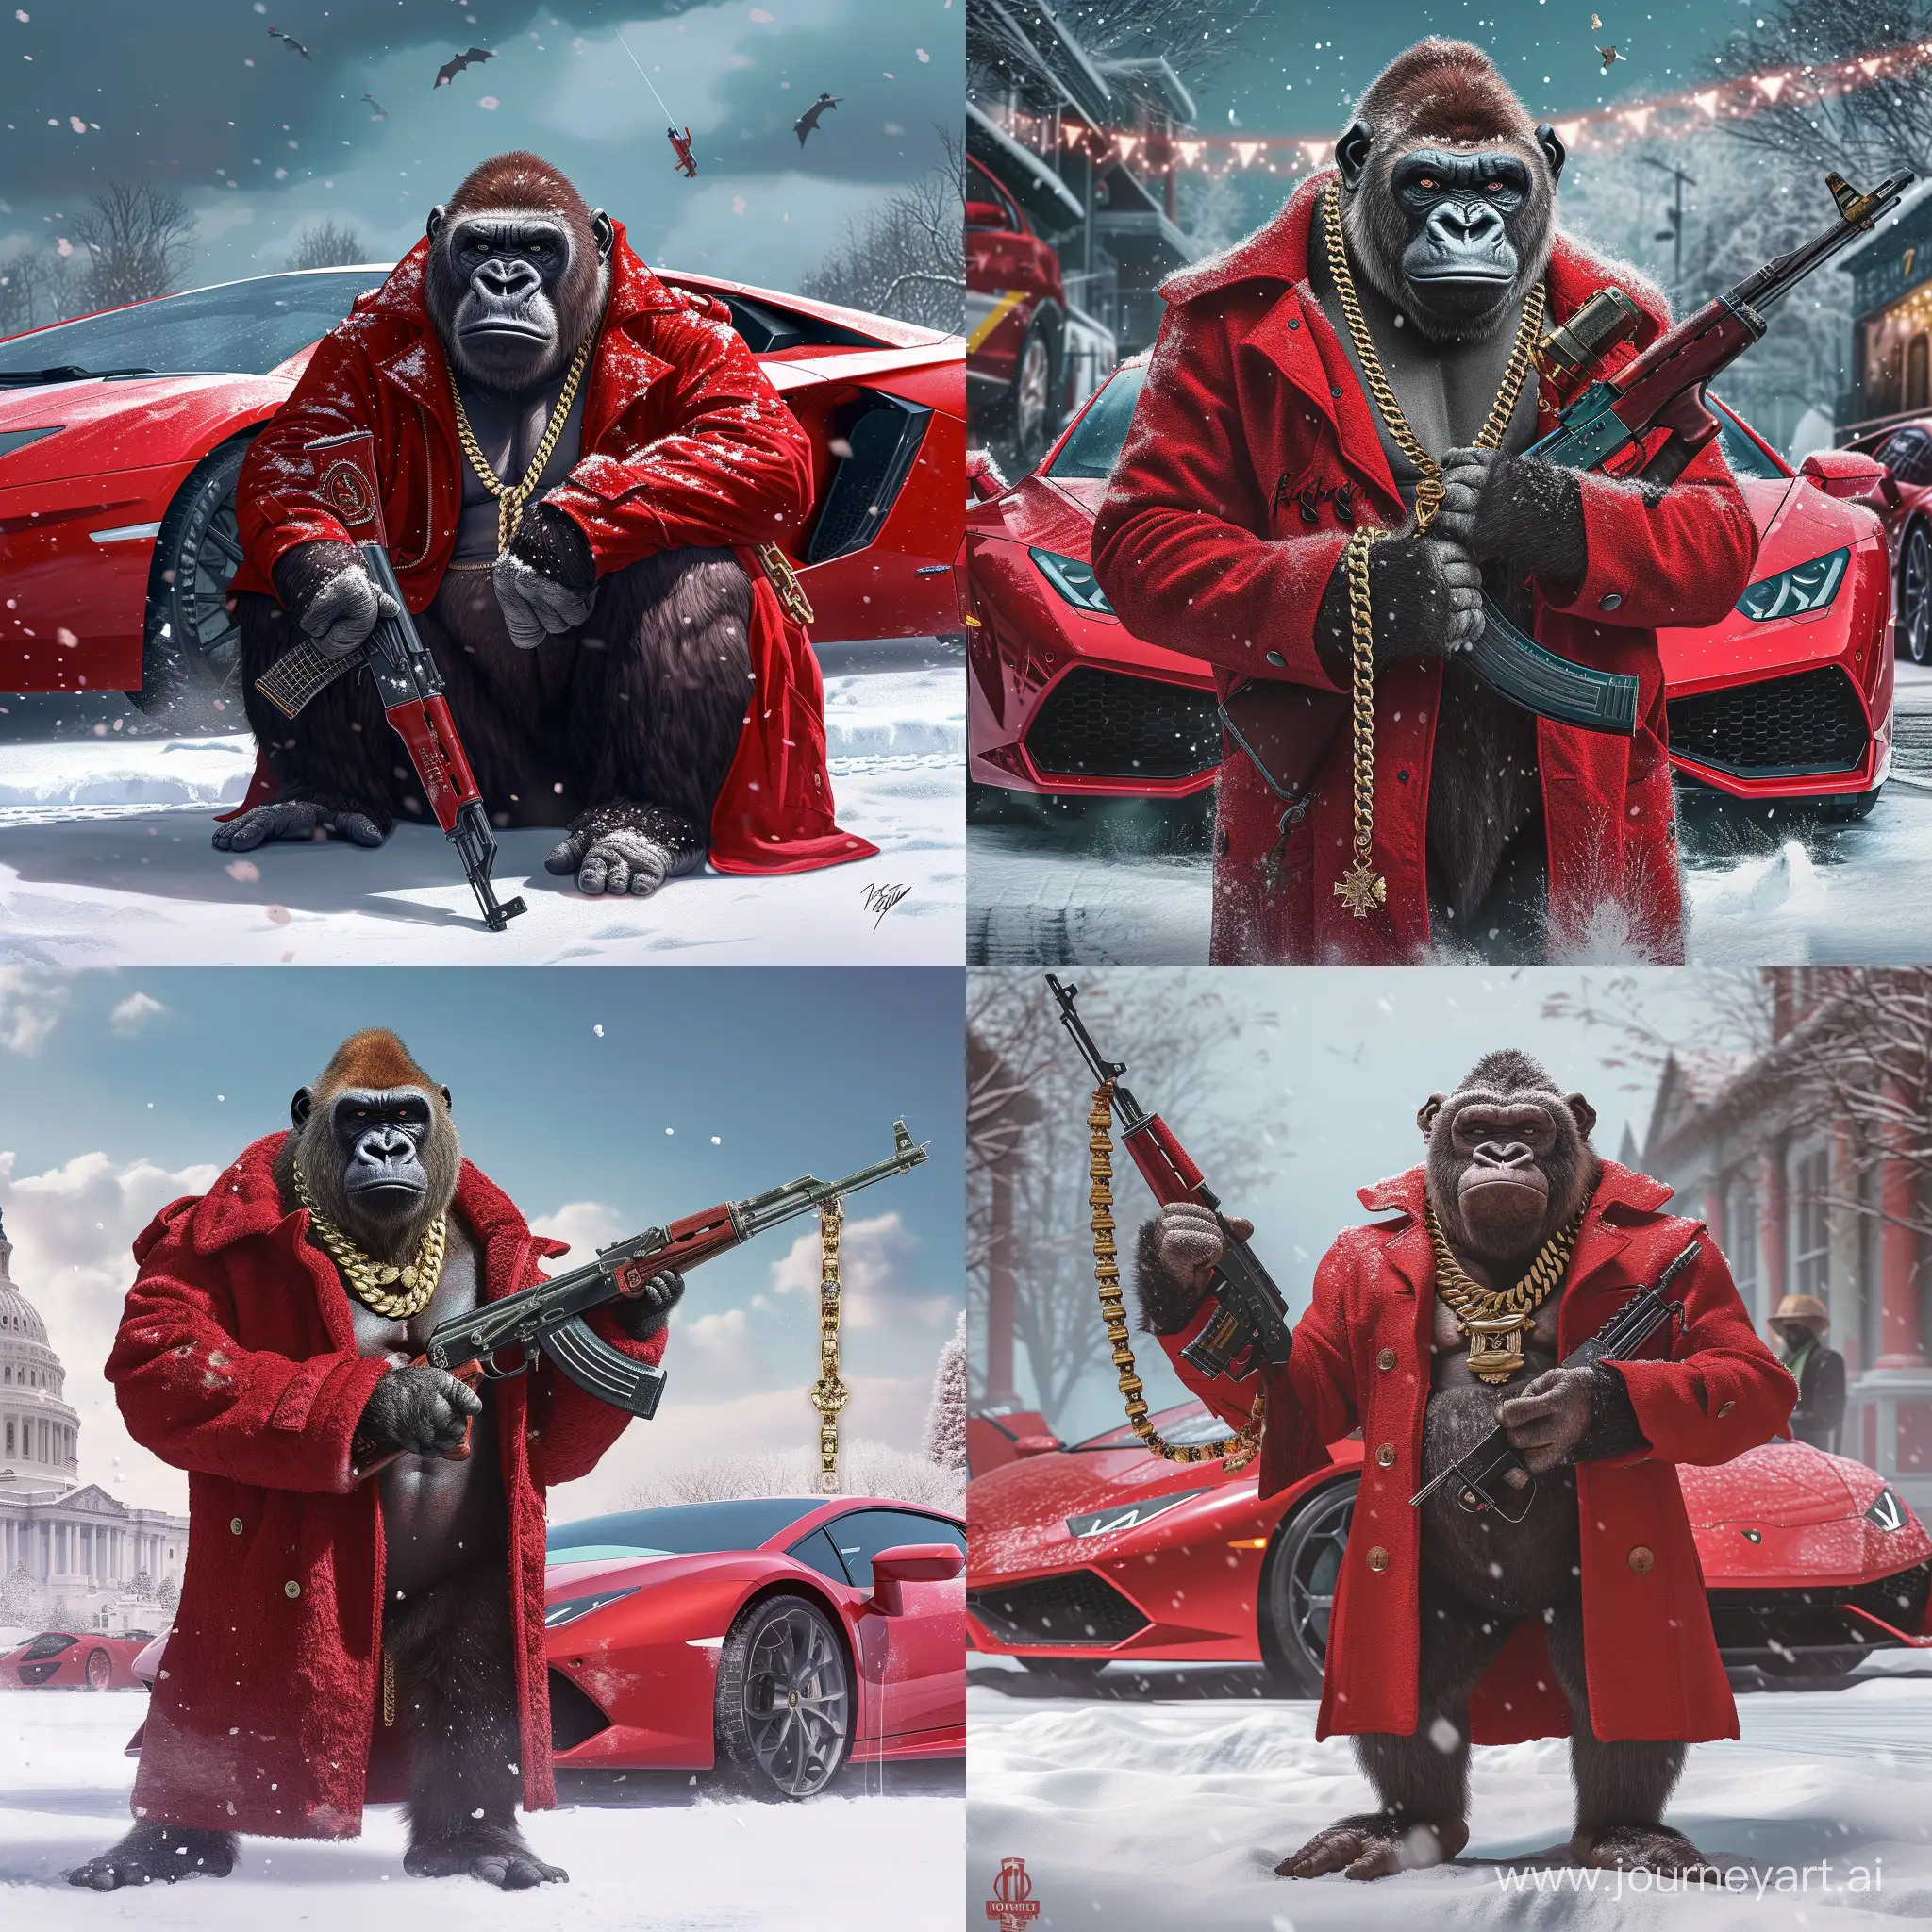 gangster gorilla wearing red coat and cuban chain holding an ak47 infront of a red lambo in the snow